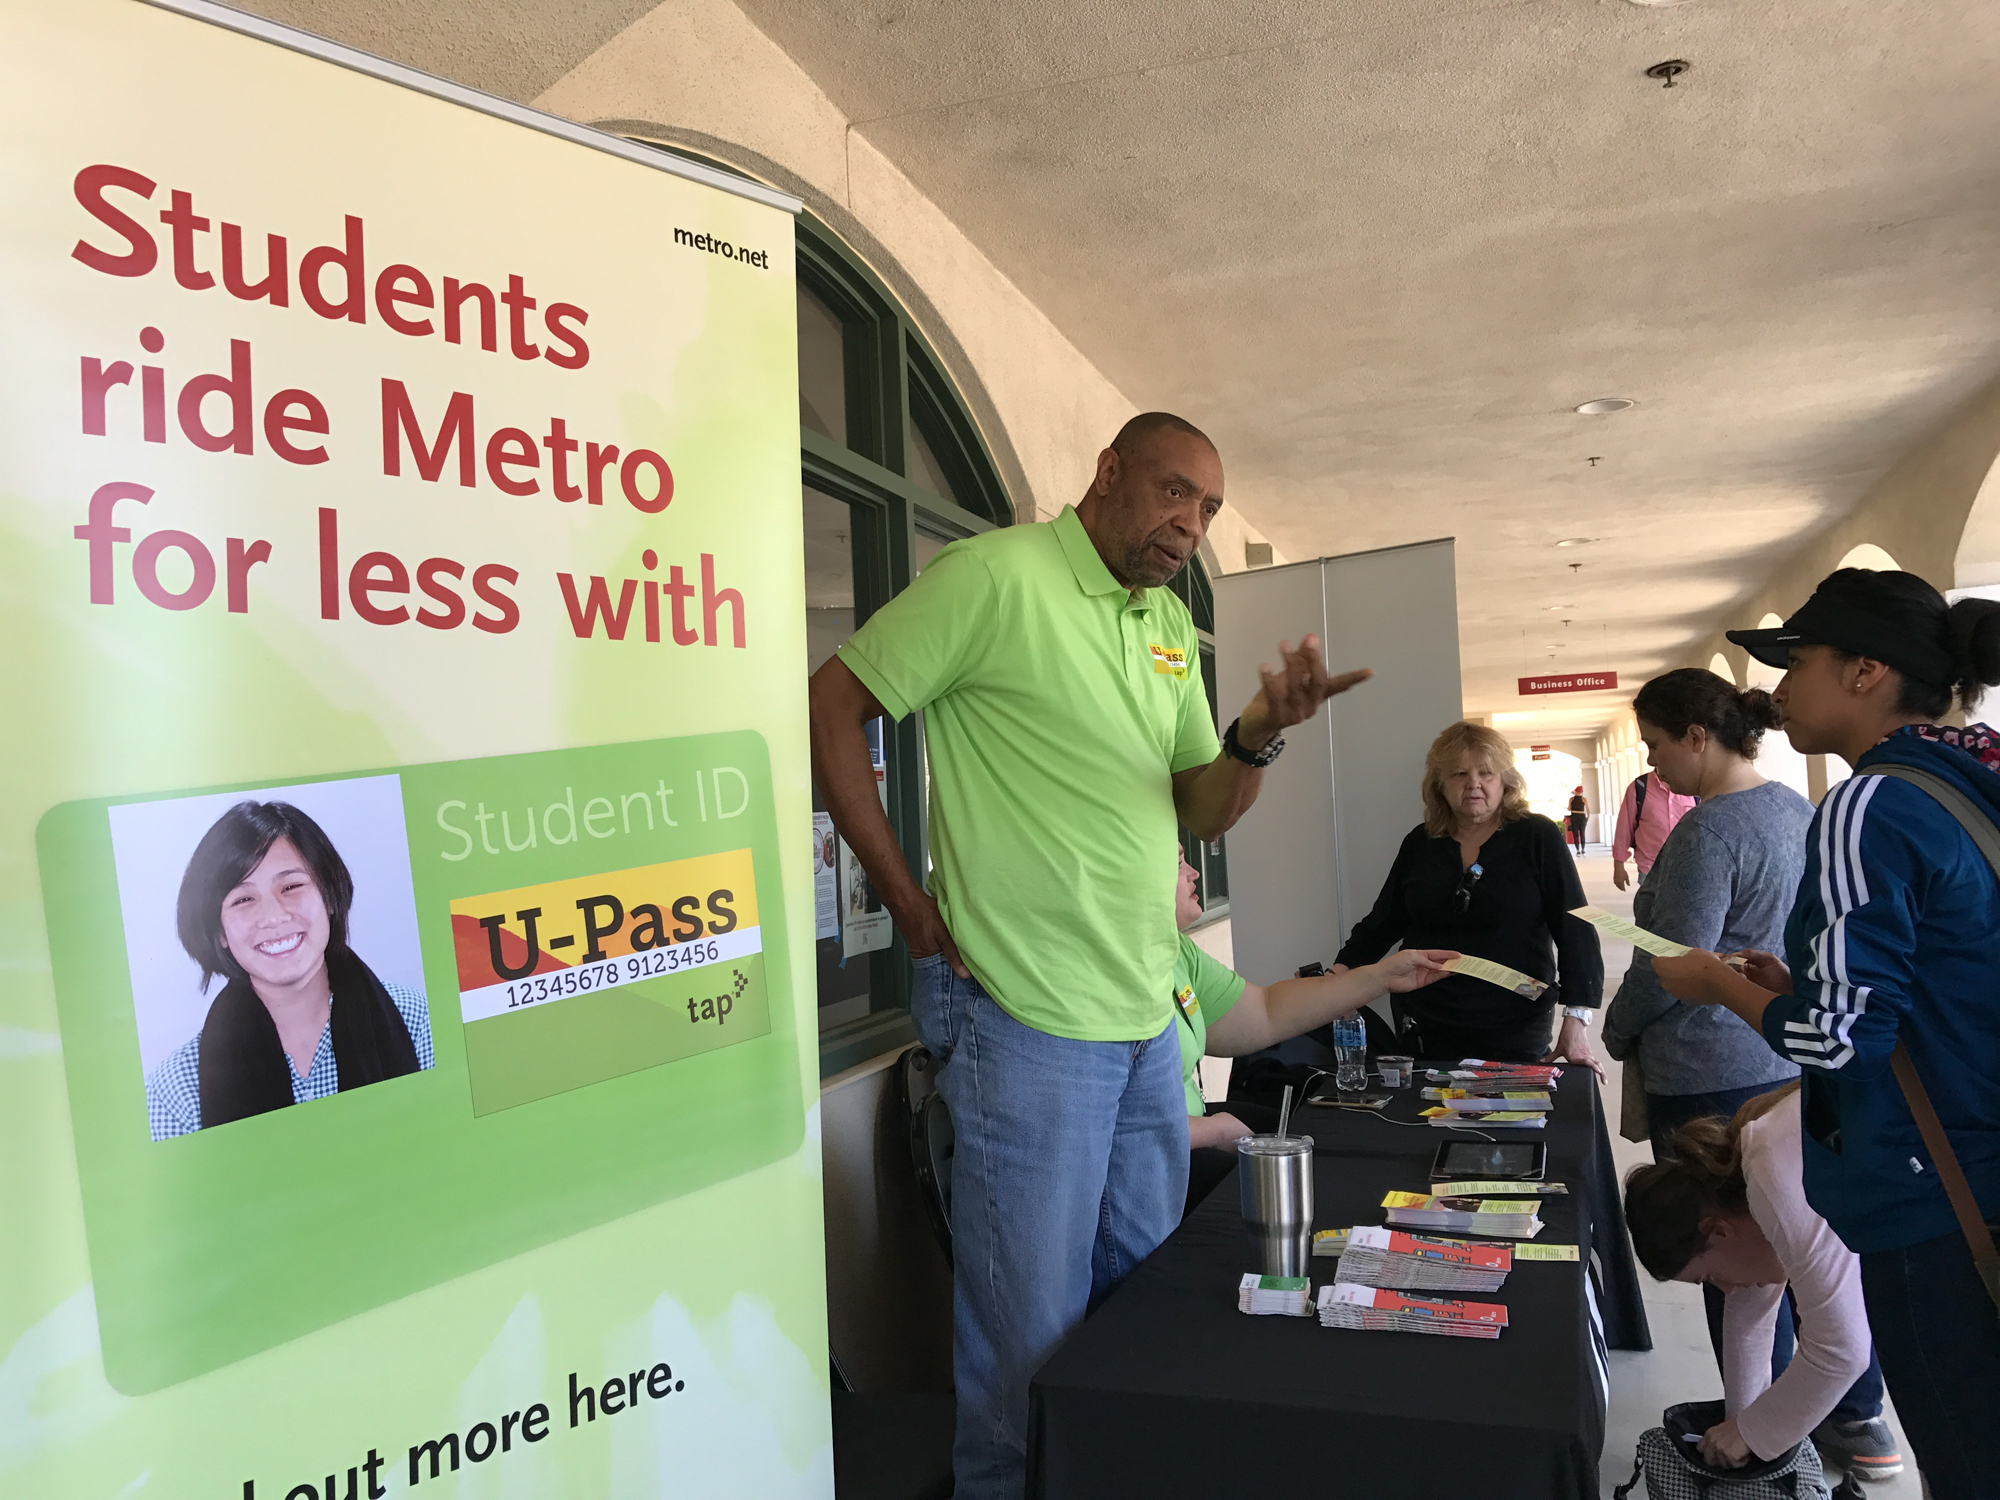 Metro U-Pass now available for purchase UPDATED U-Pass price lowered